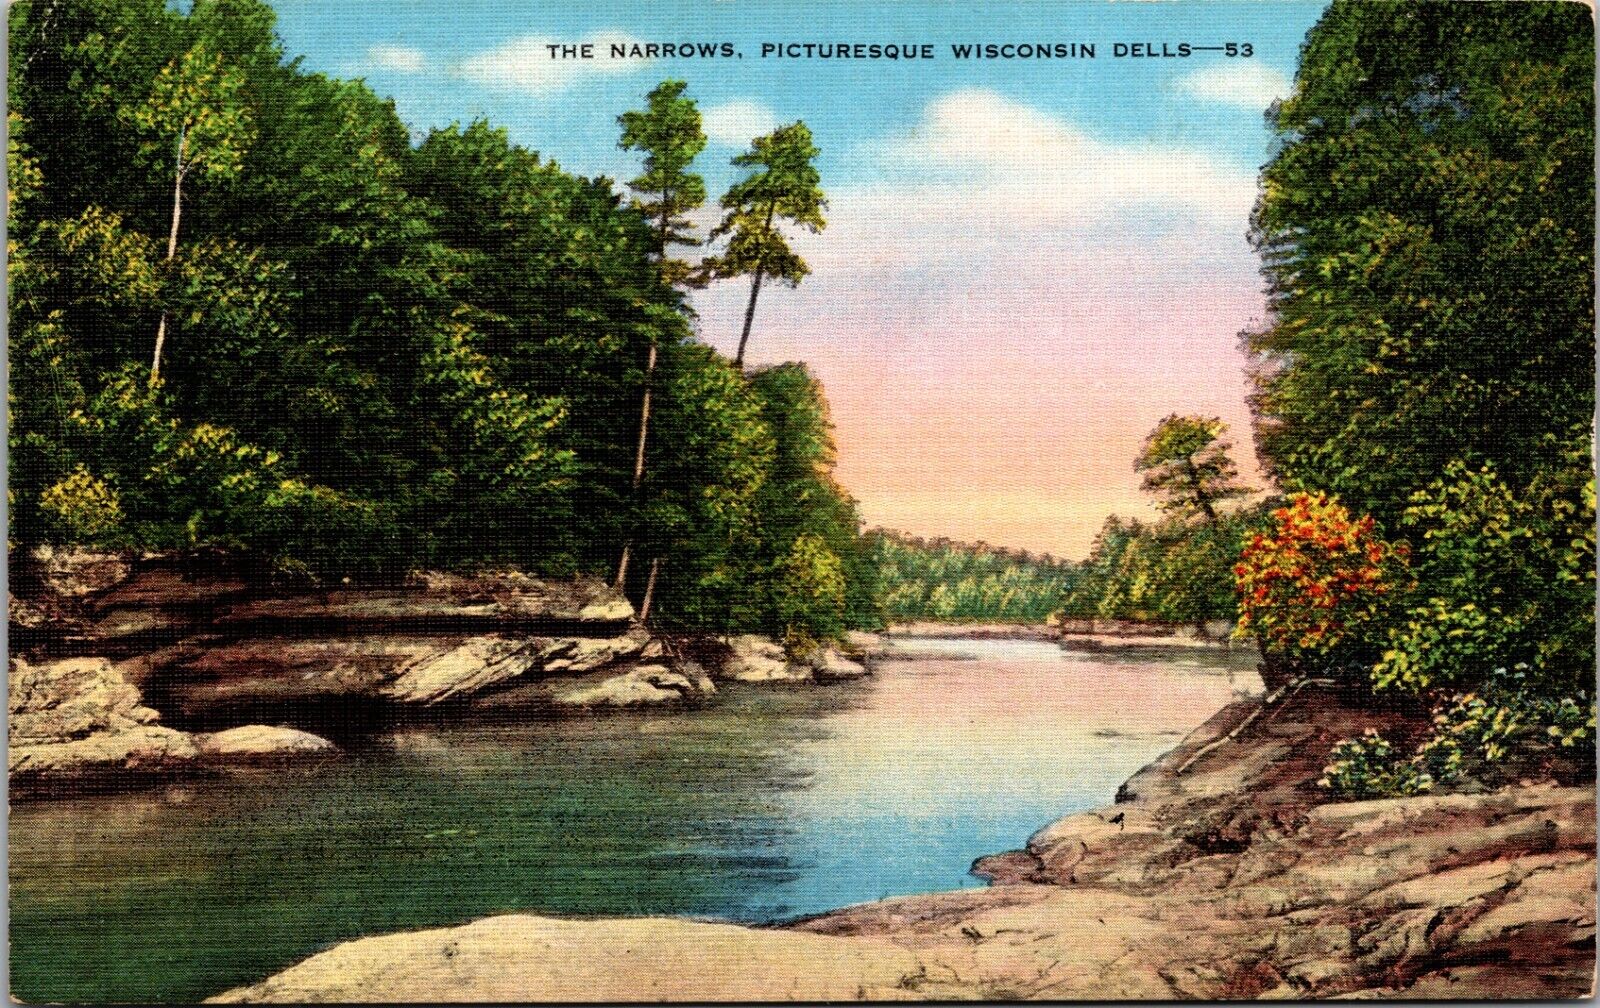 The Narrows Picturesque Wisconsin Dells 1942